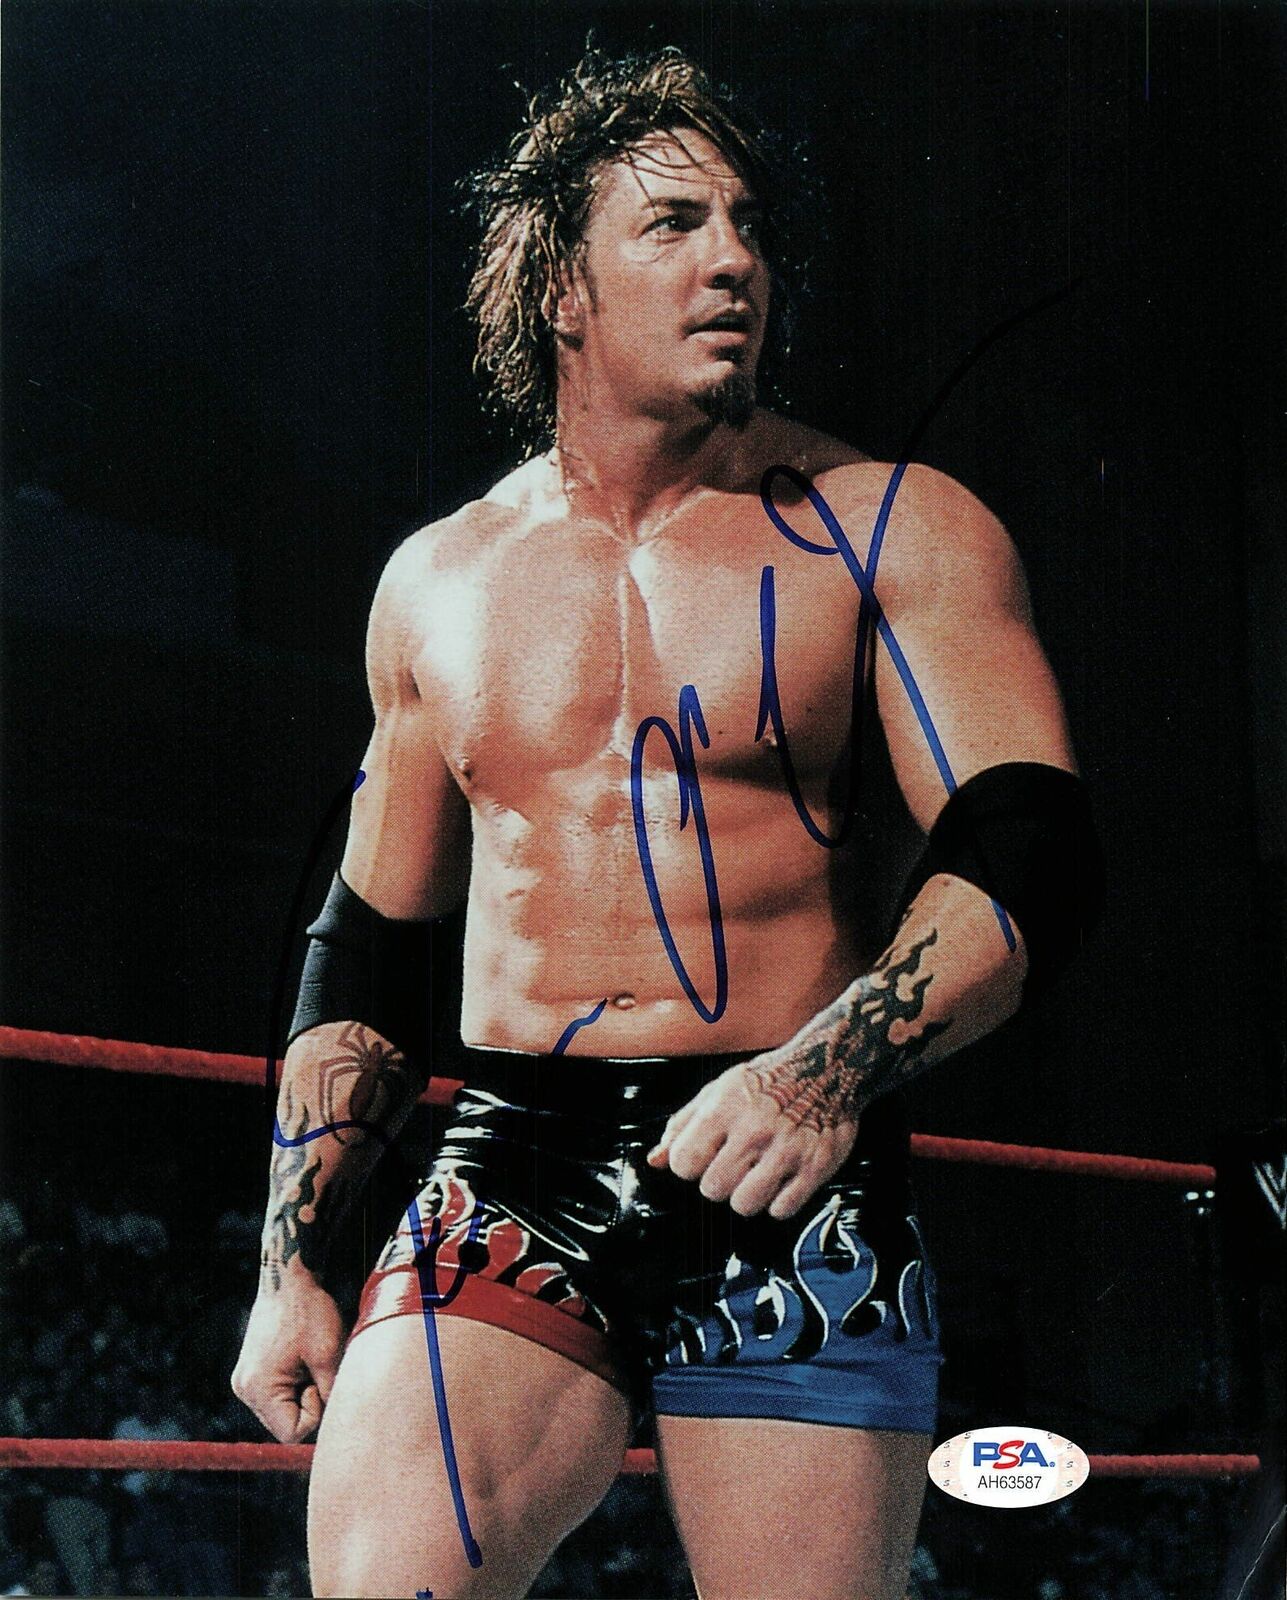 Sean O'Haire signed 8x10 Photo Poster painting PSA/DNA COA WWE Autographed Wrestling